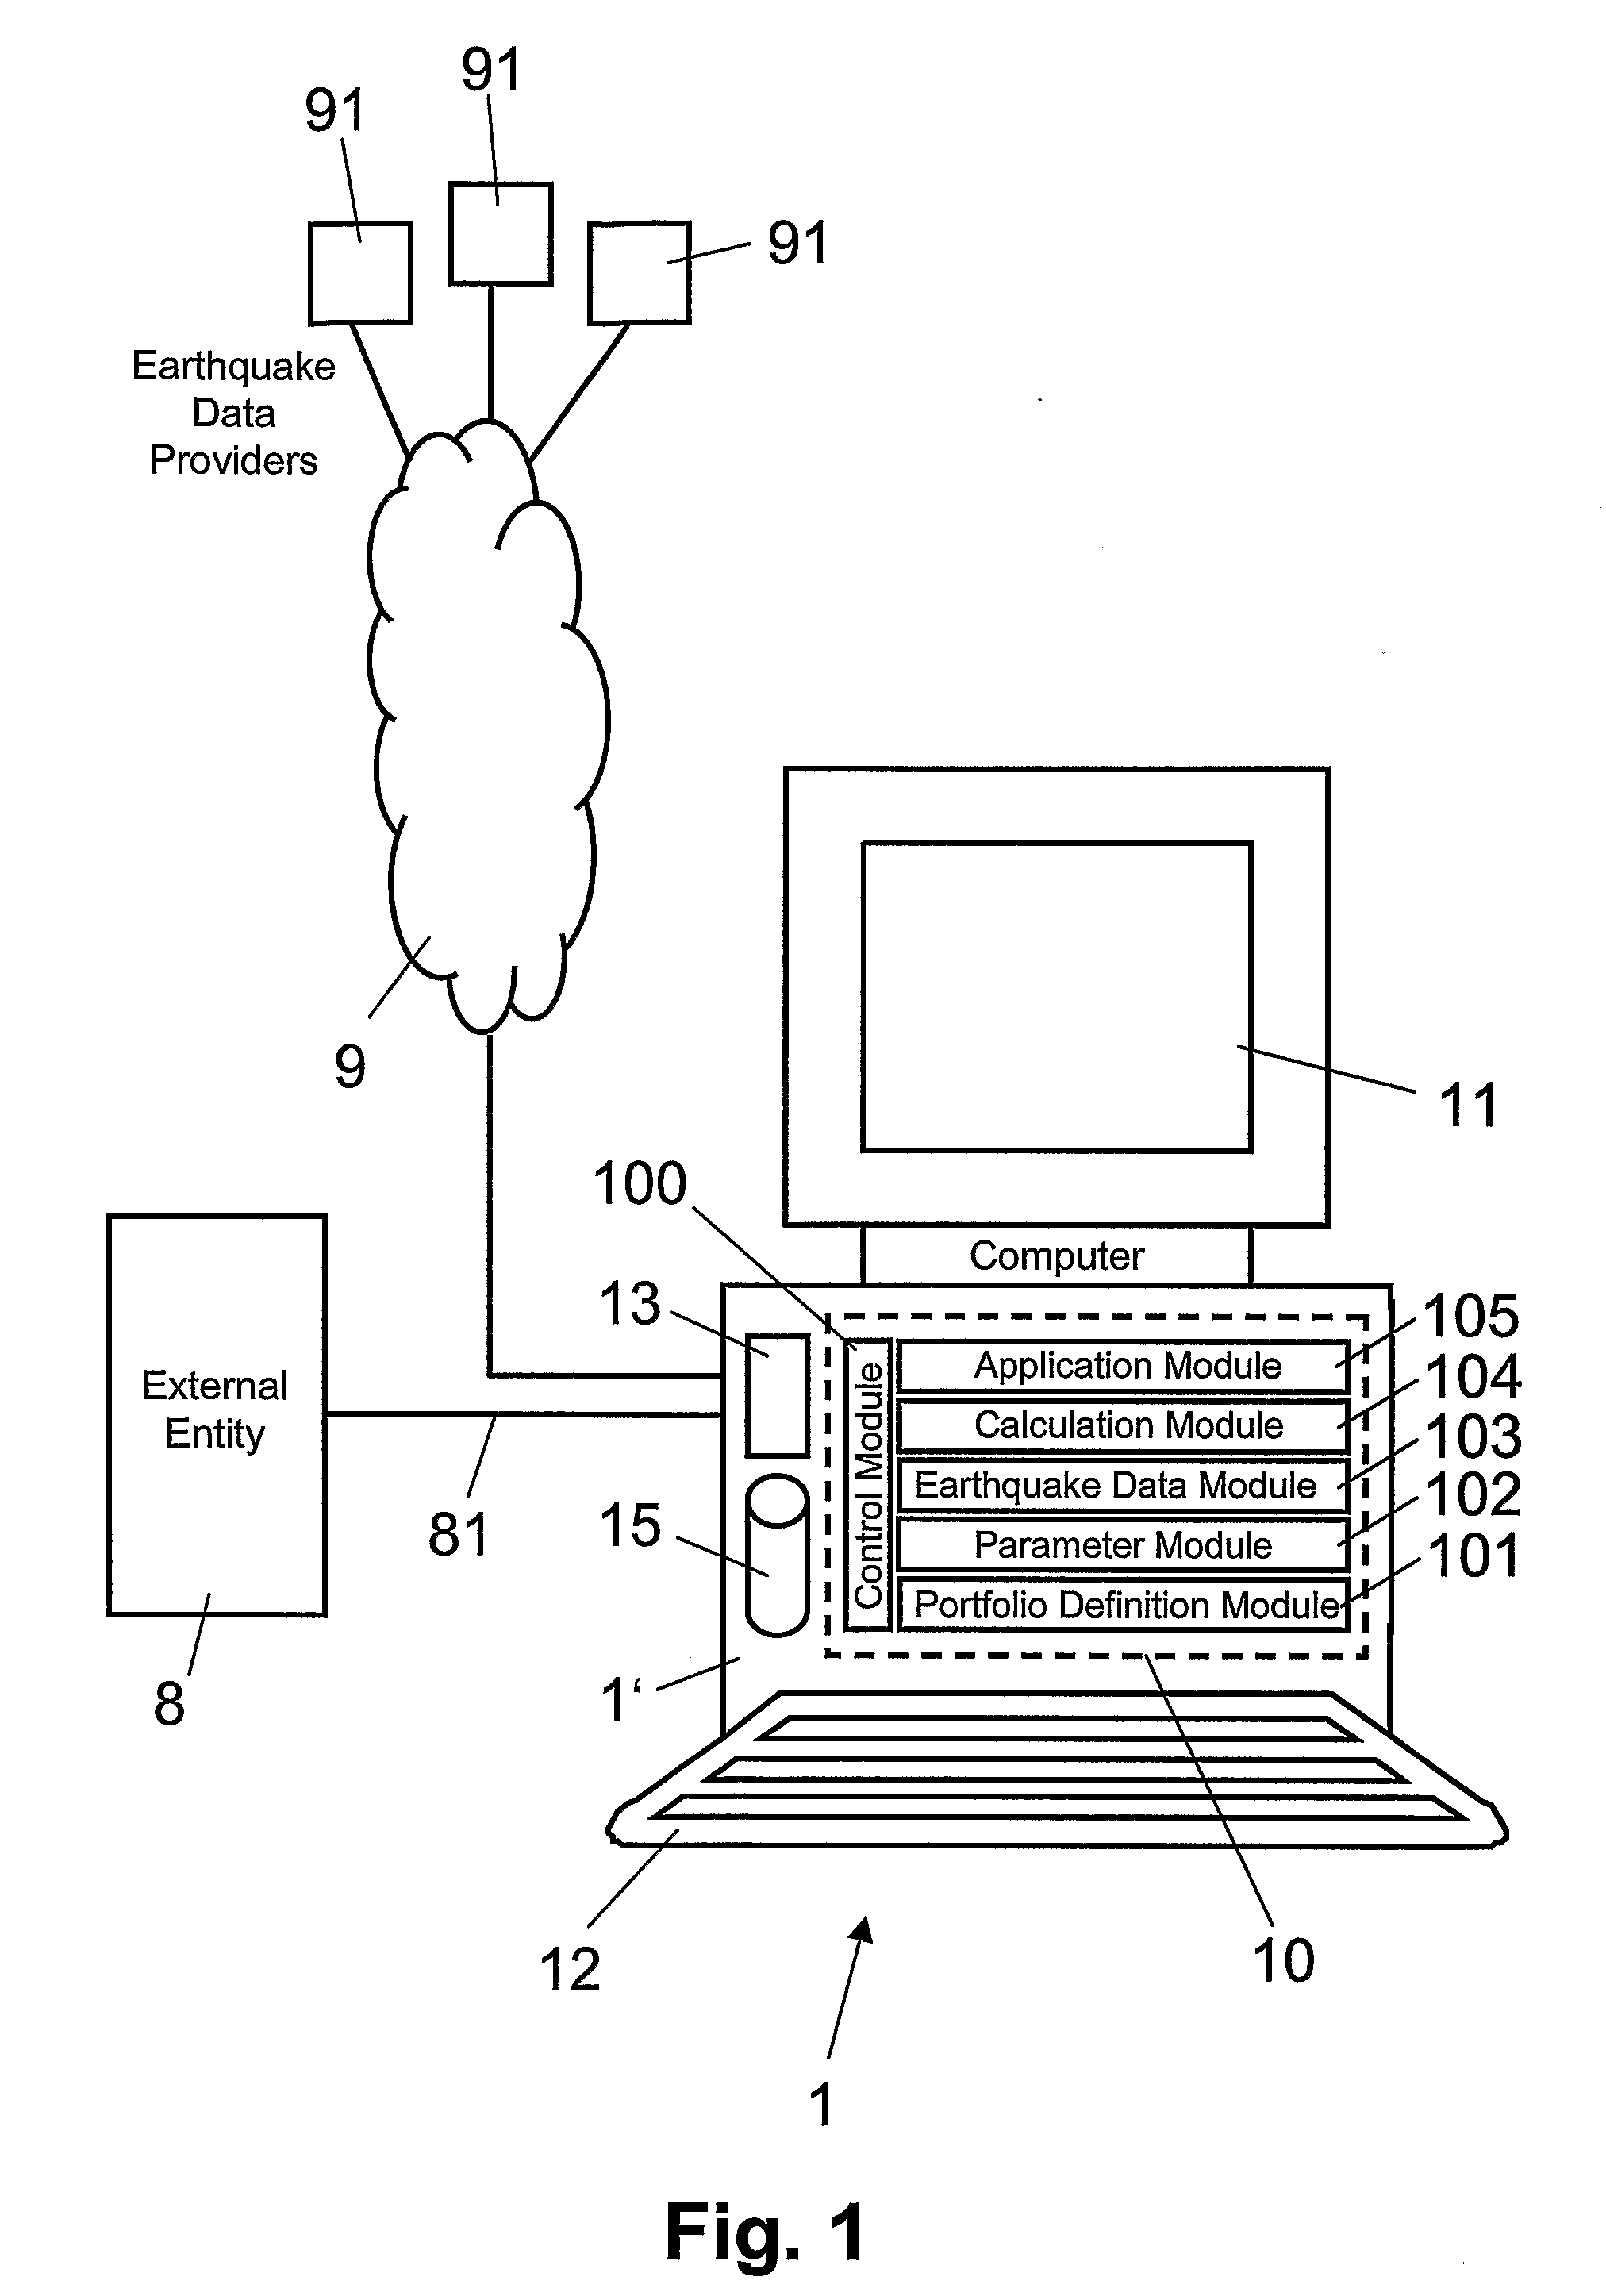 Computer System and Method for Determining an Earthquake Damage Index